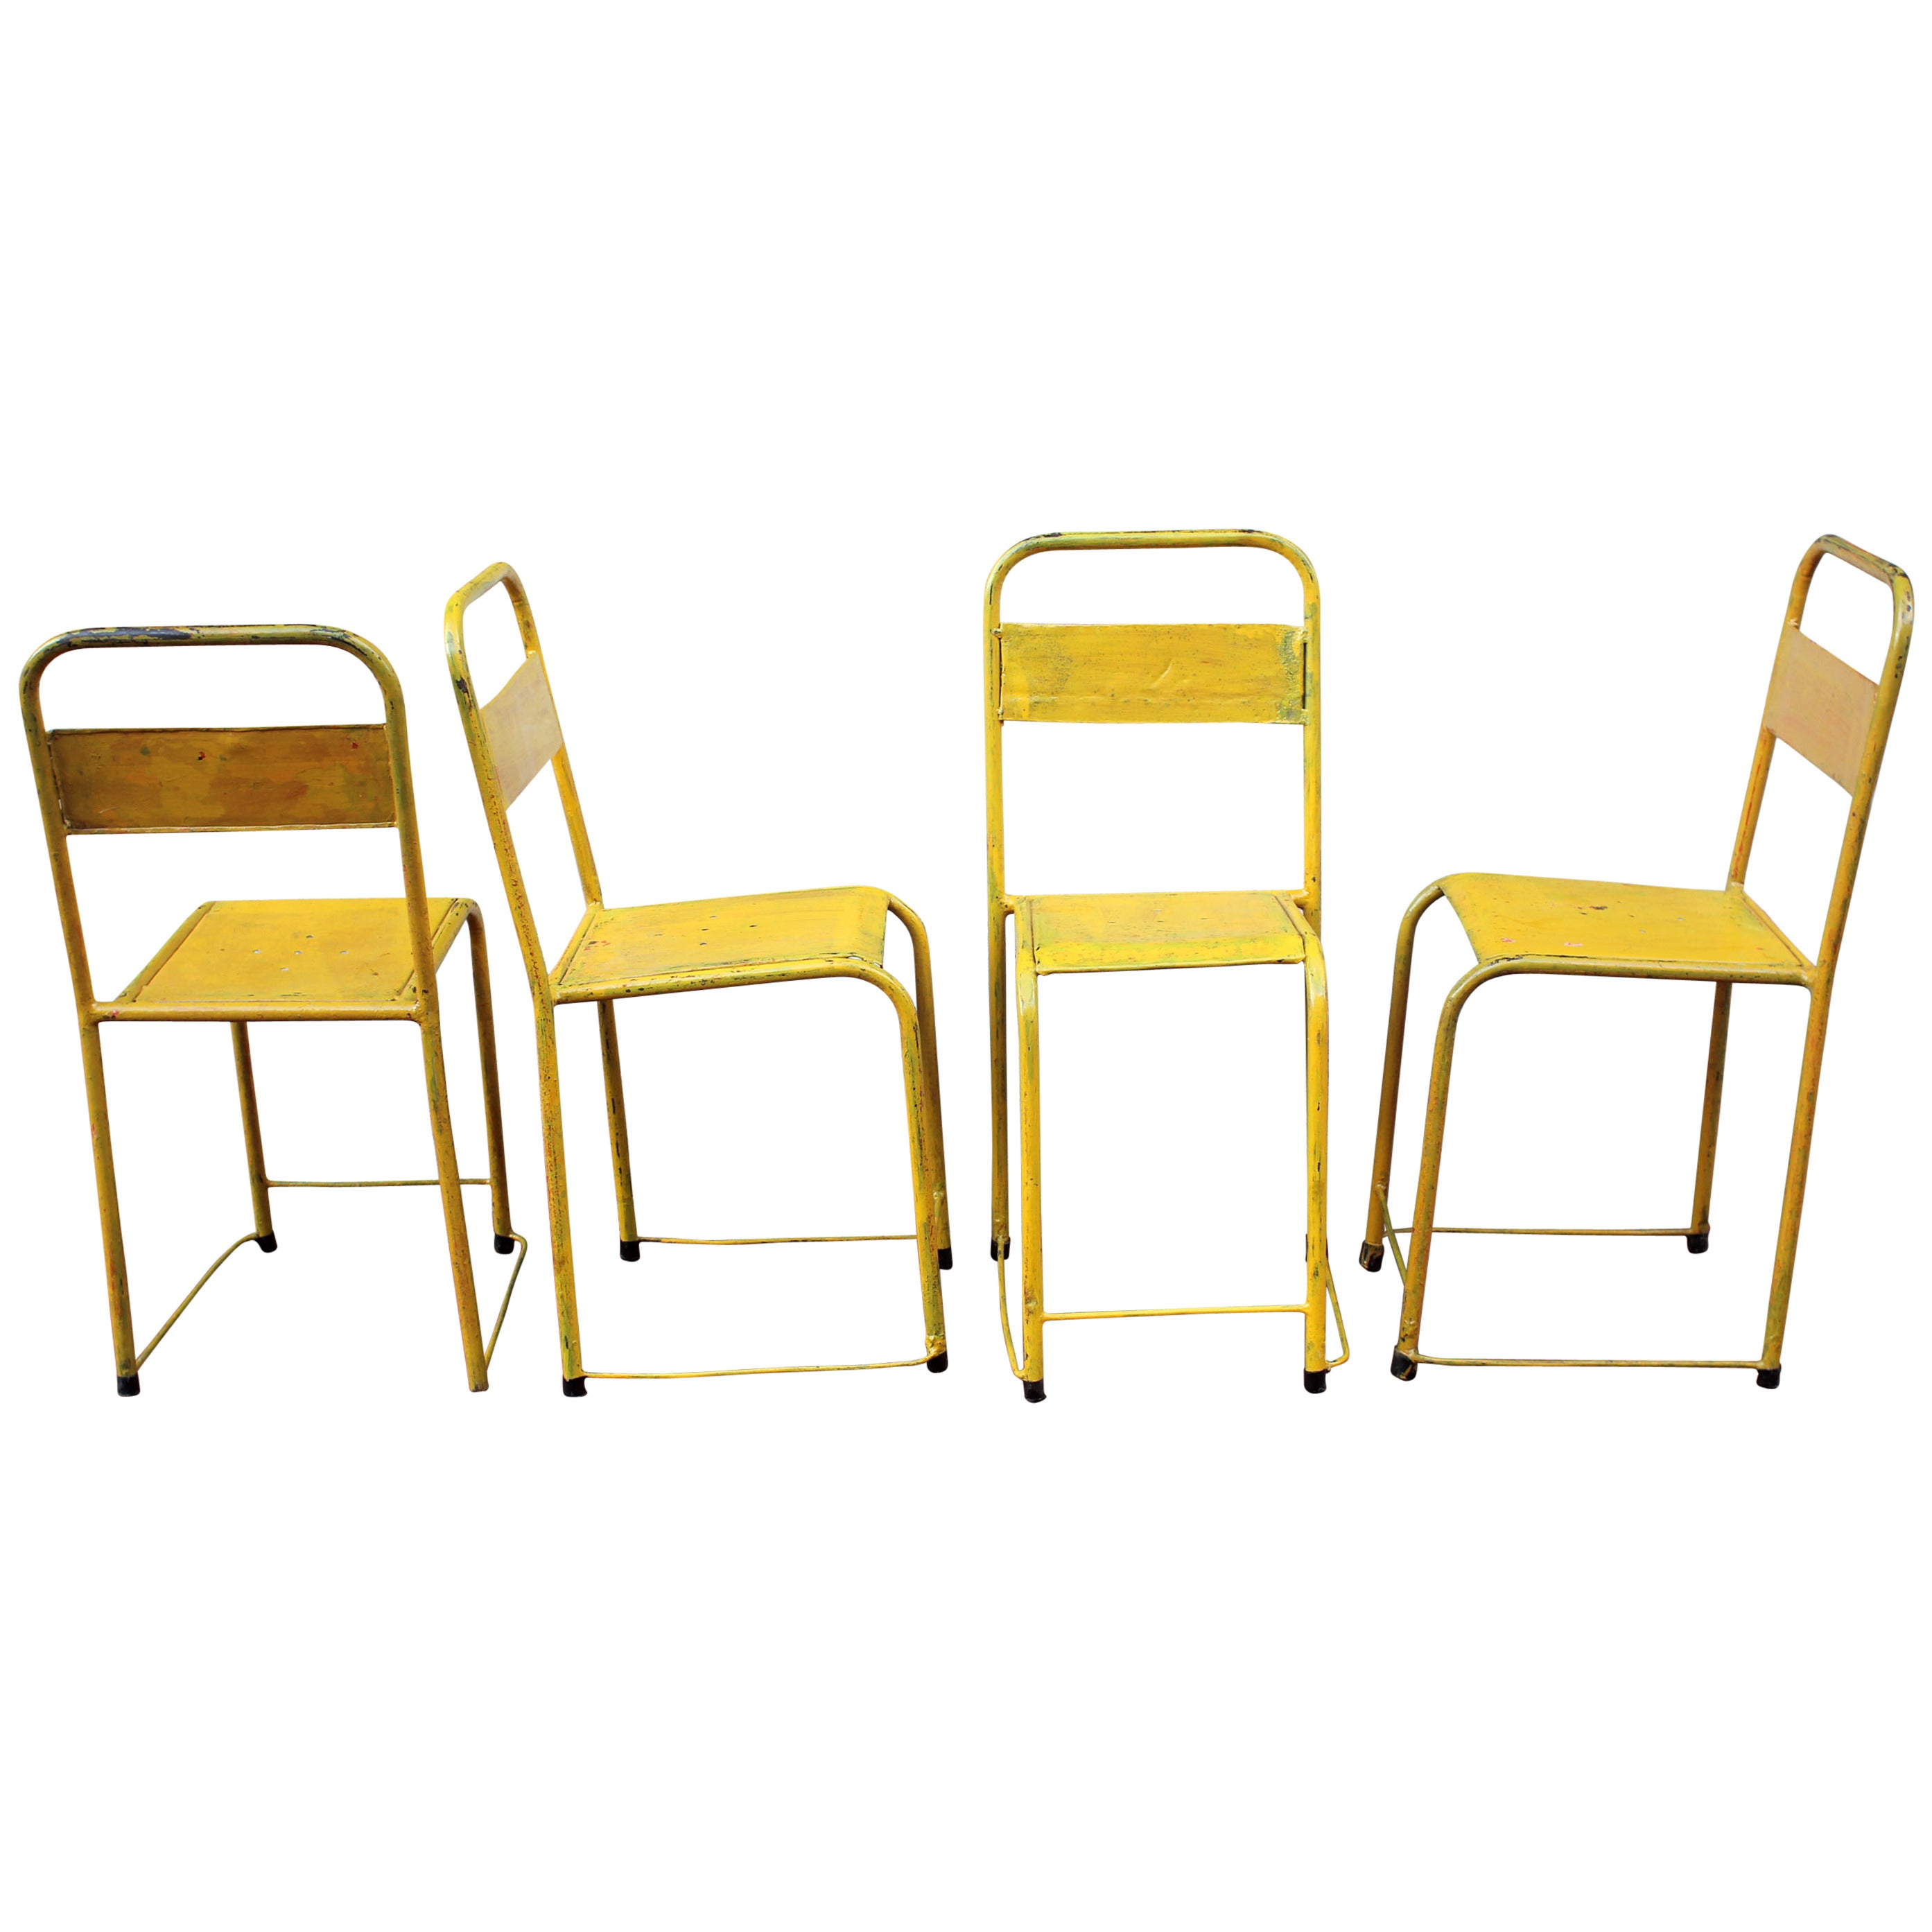 Set of 4 Painted Metal Chairs